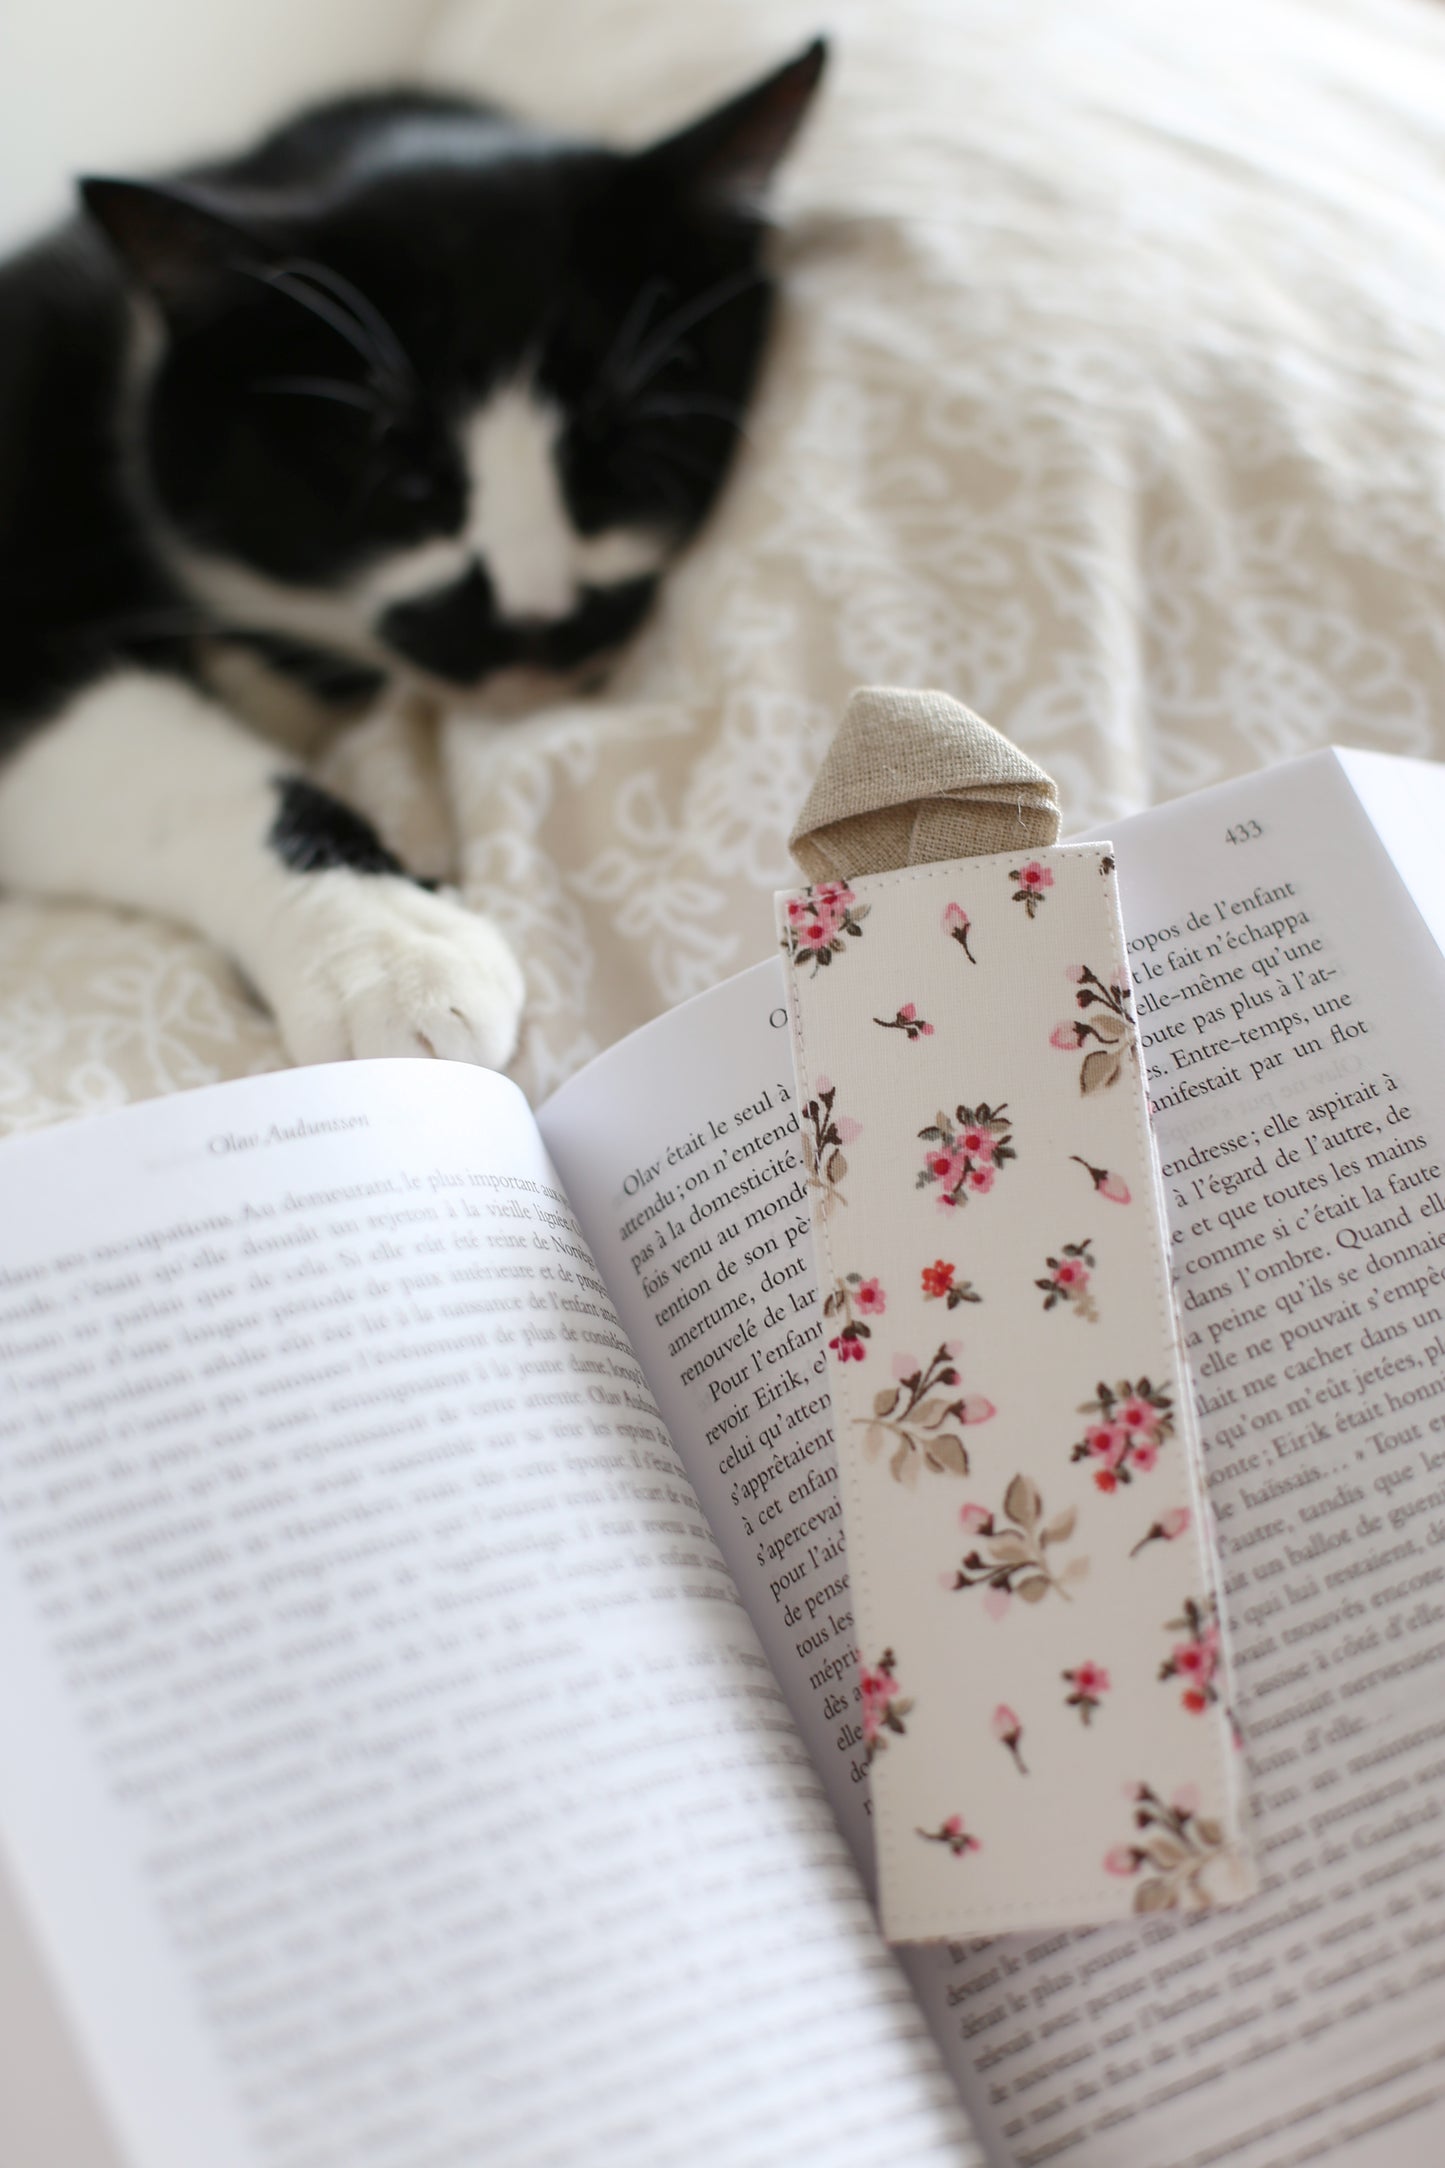 Bookmark "Emma Bovary" - Coral